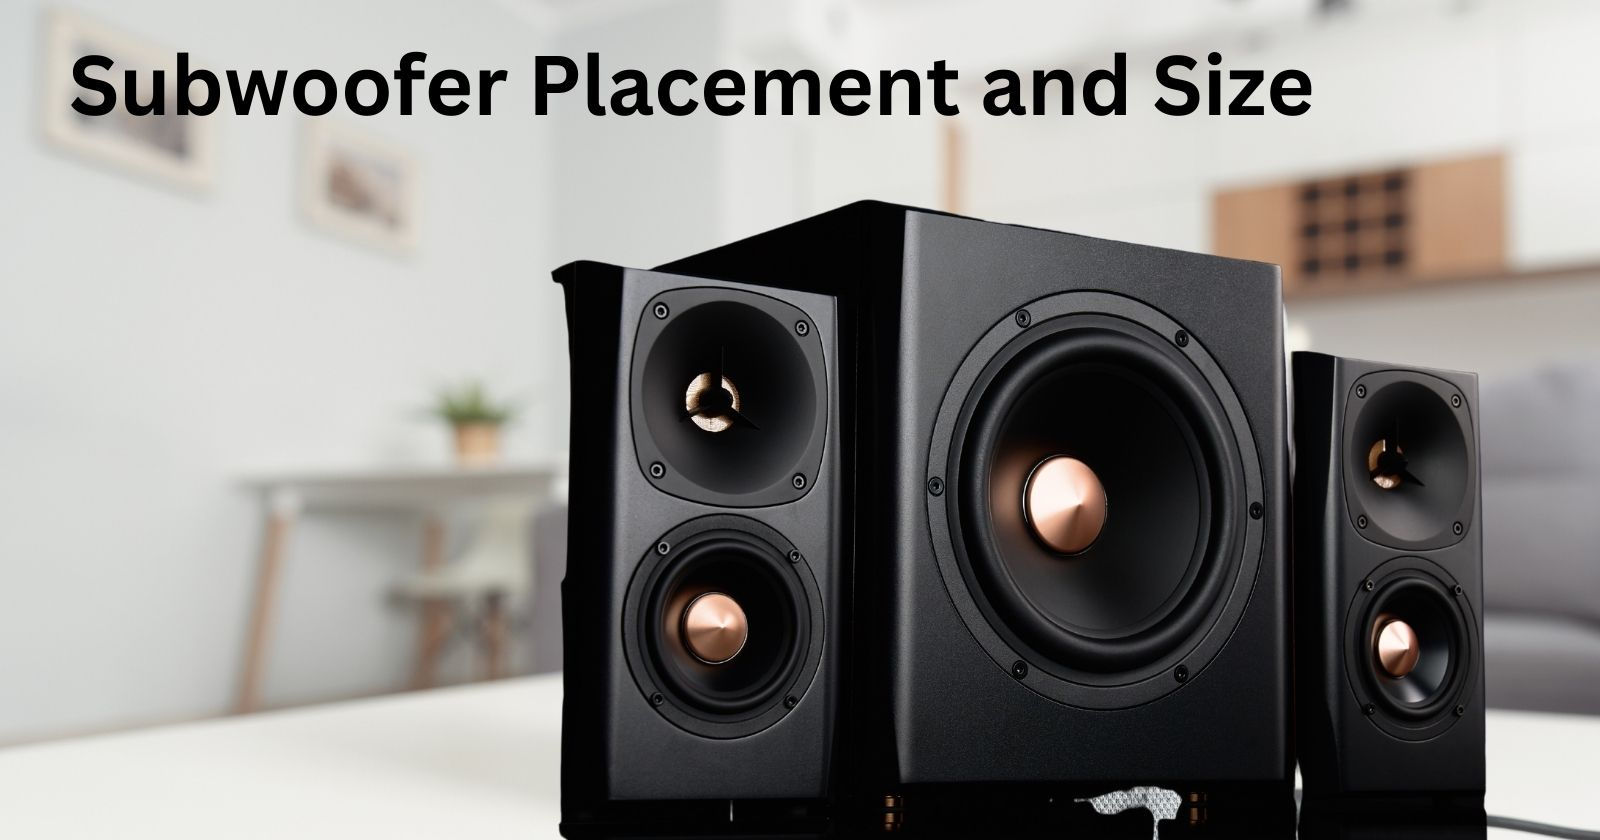 Subwoofer Placement and Size